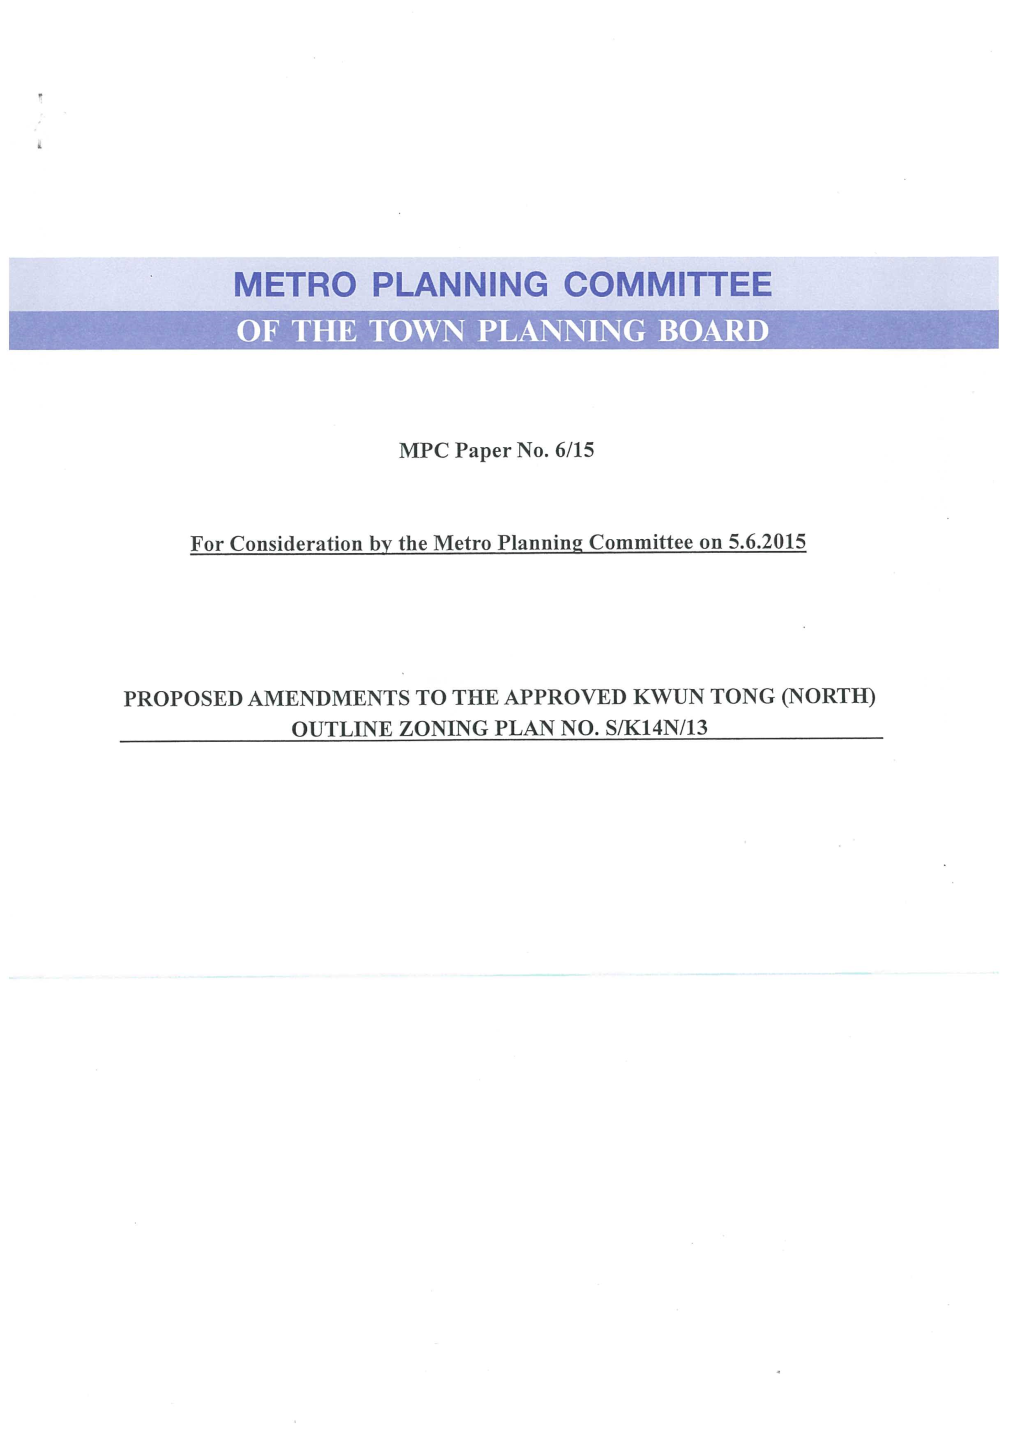 MPC Paper No. 6/15 for Consideration by the Metro Planning Committee on 5.6.2015